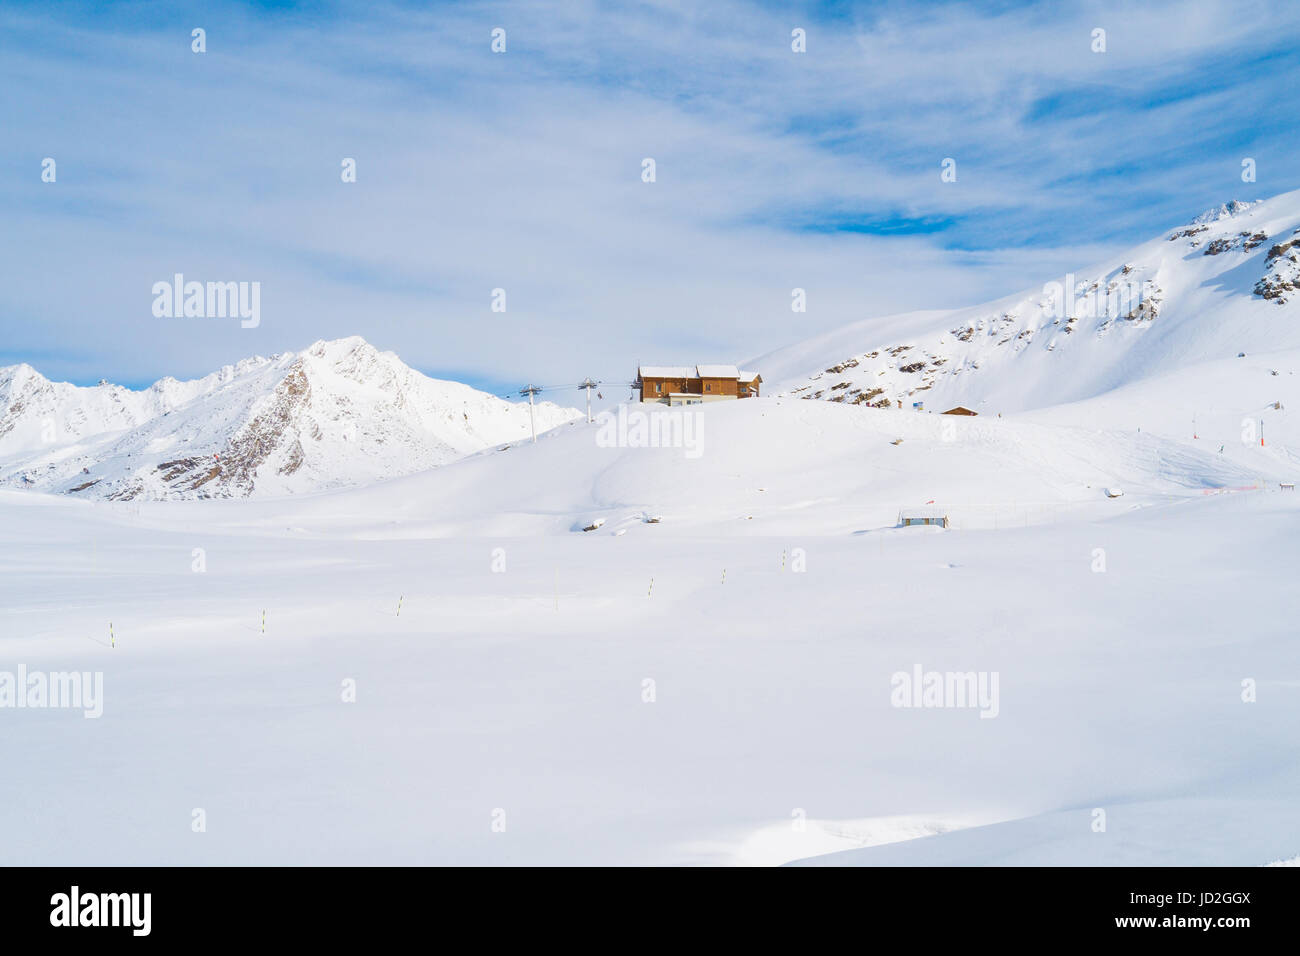 Alps mountains with snow in Val Thorens, France Stock Photo